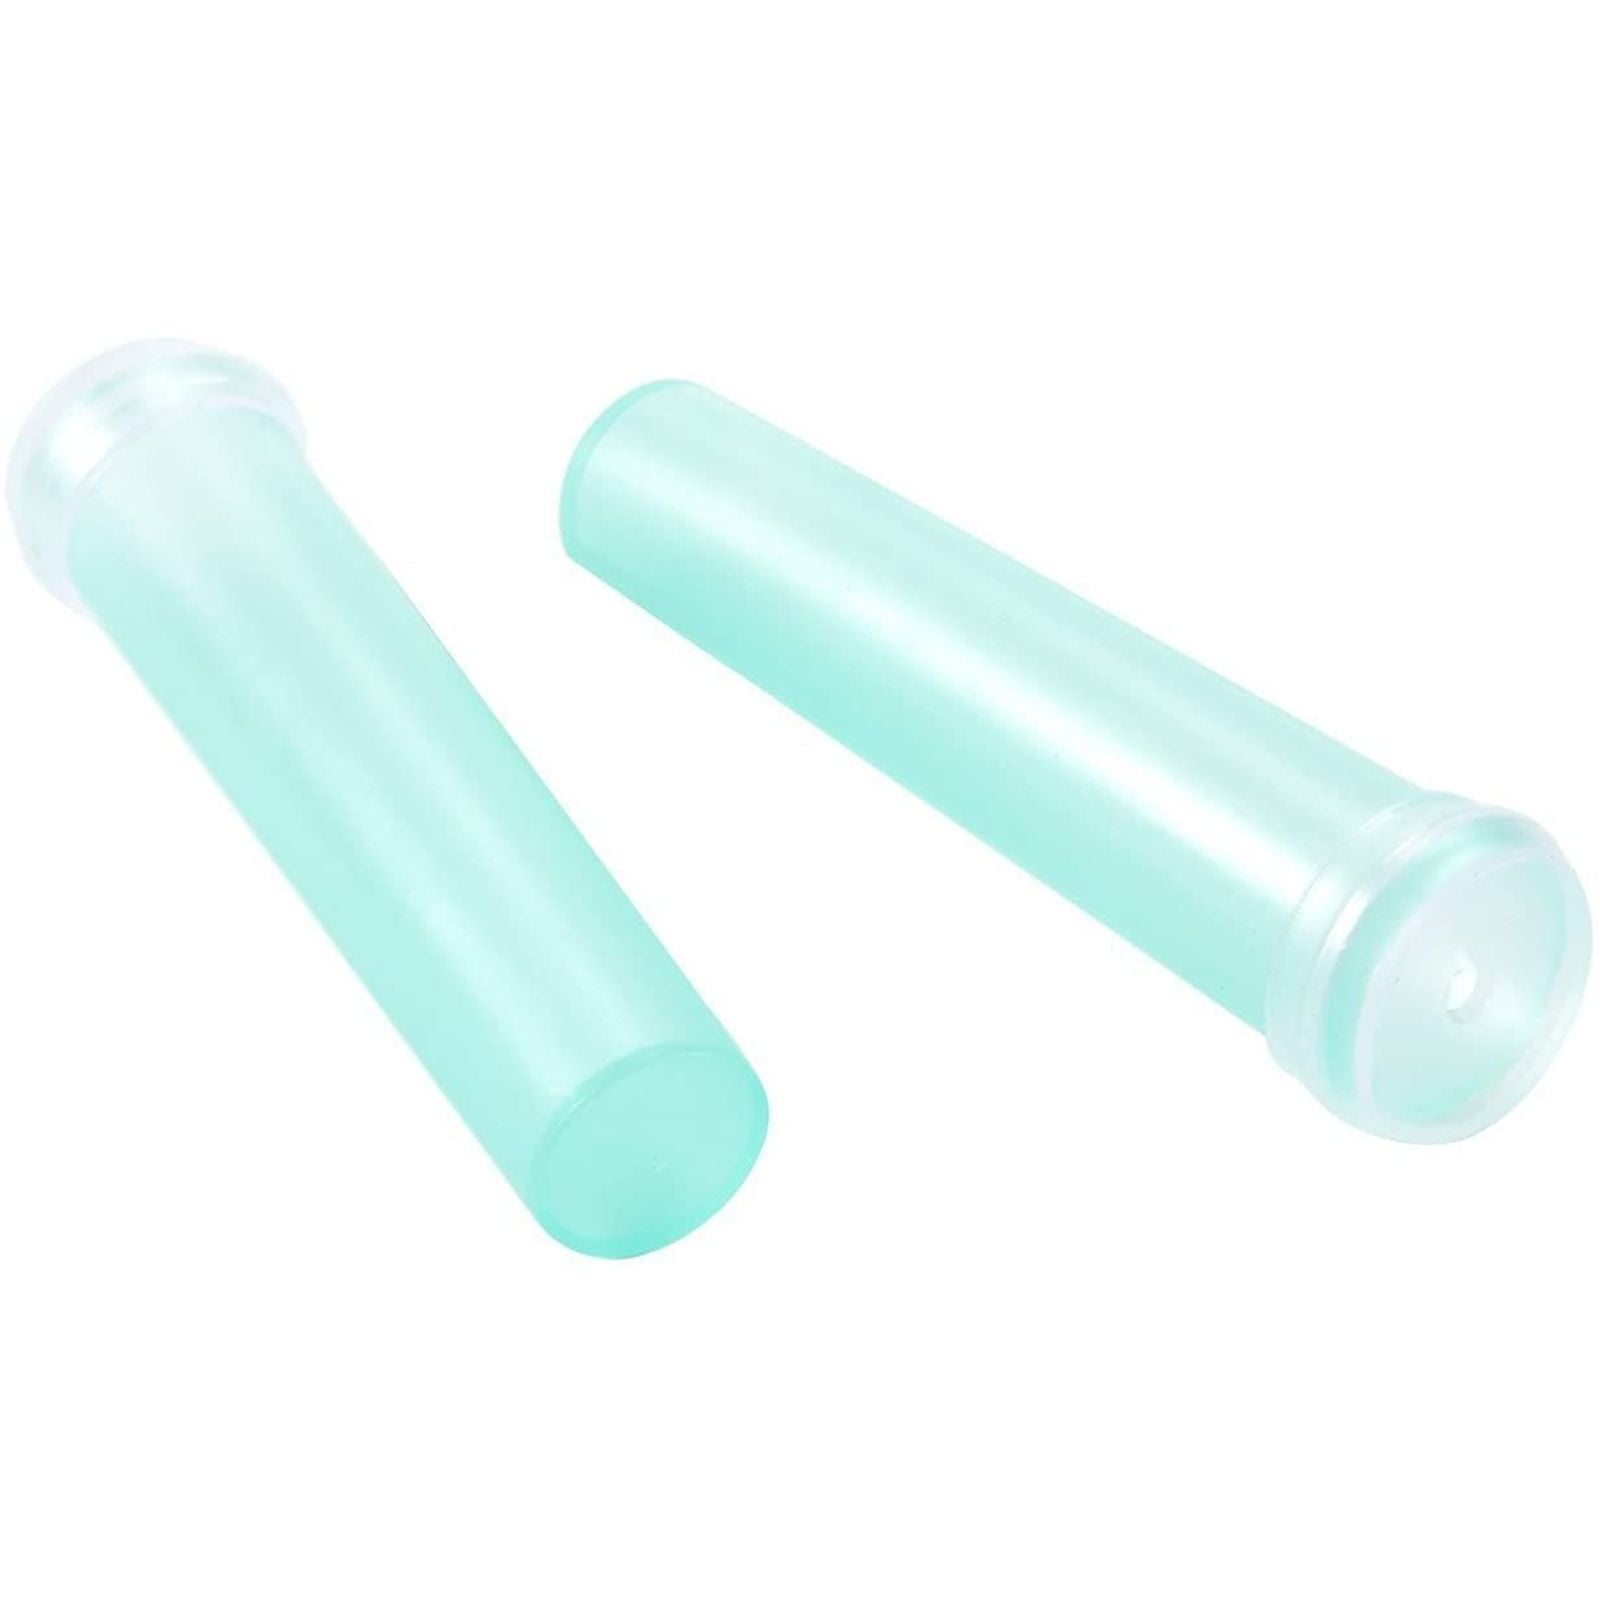 Juvale Flower Tube - 100-Pack Floral Tube, Flower Vials, Floral Water Tube for Flower Arrangements, Clear Blue Plastic, 0.6 x 2.8 x 0.6 Inches